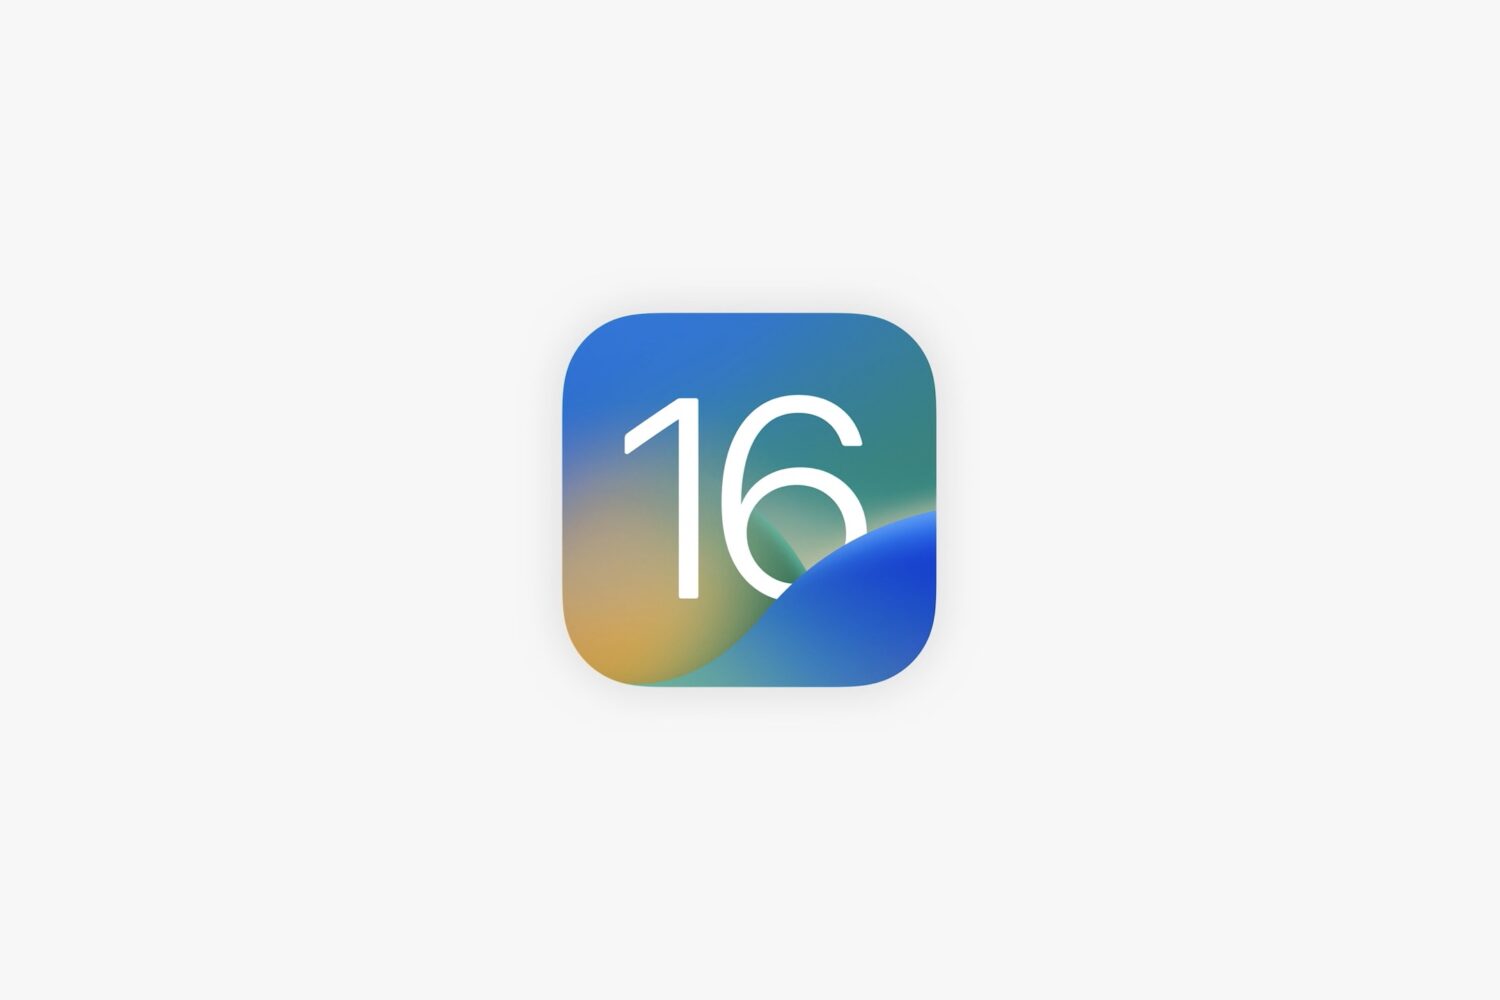 The iOS 16 icon is set against a solid light-gray background in this image from Apple